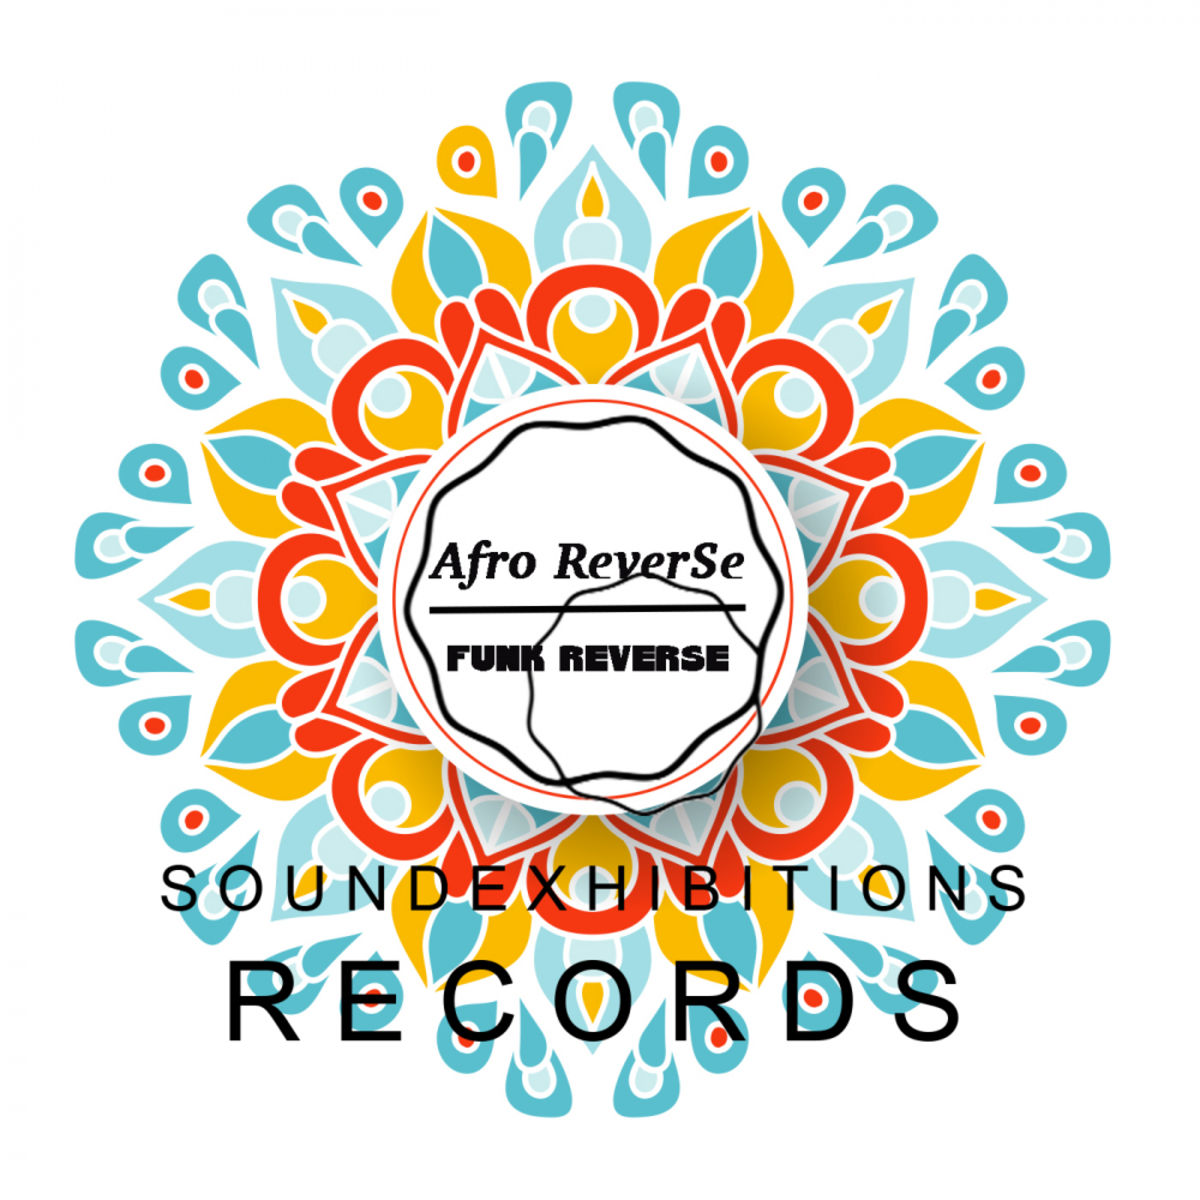 Funk ReverSe - Afro Reverse / Sound Exhibitions Records